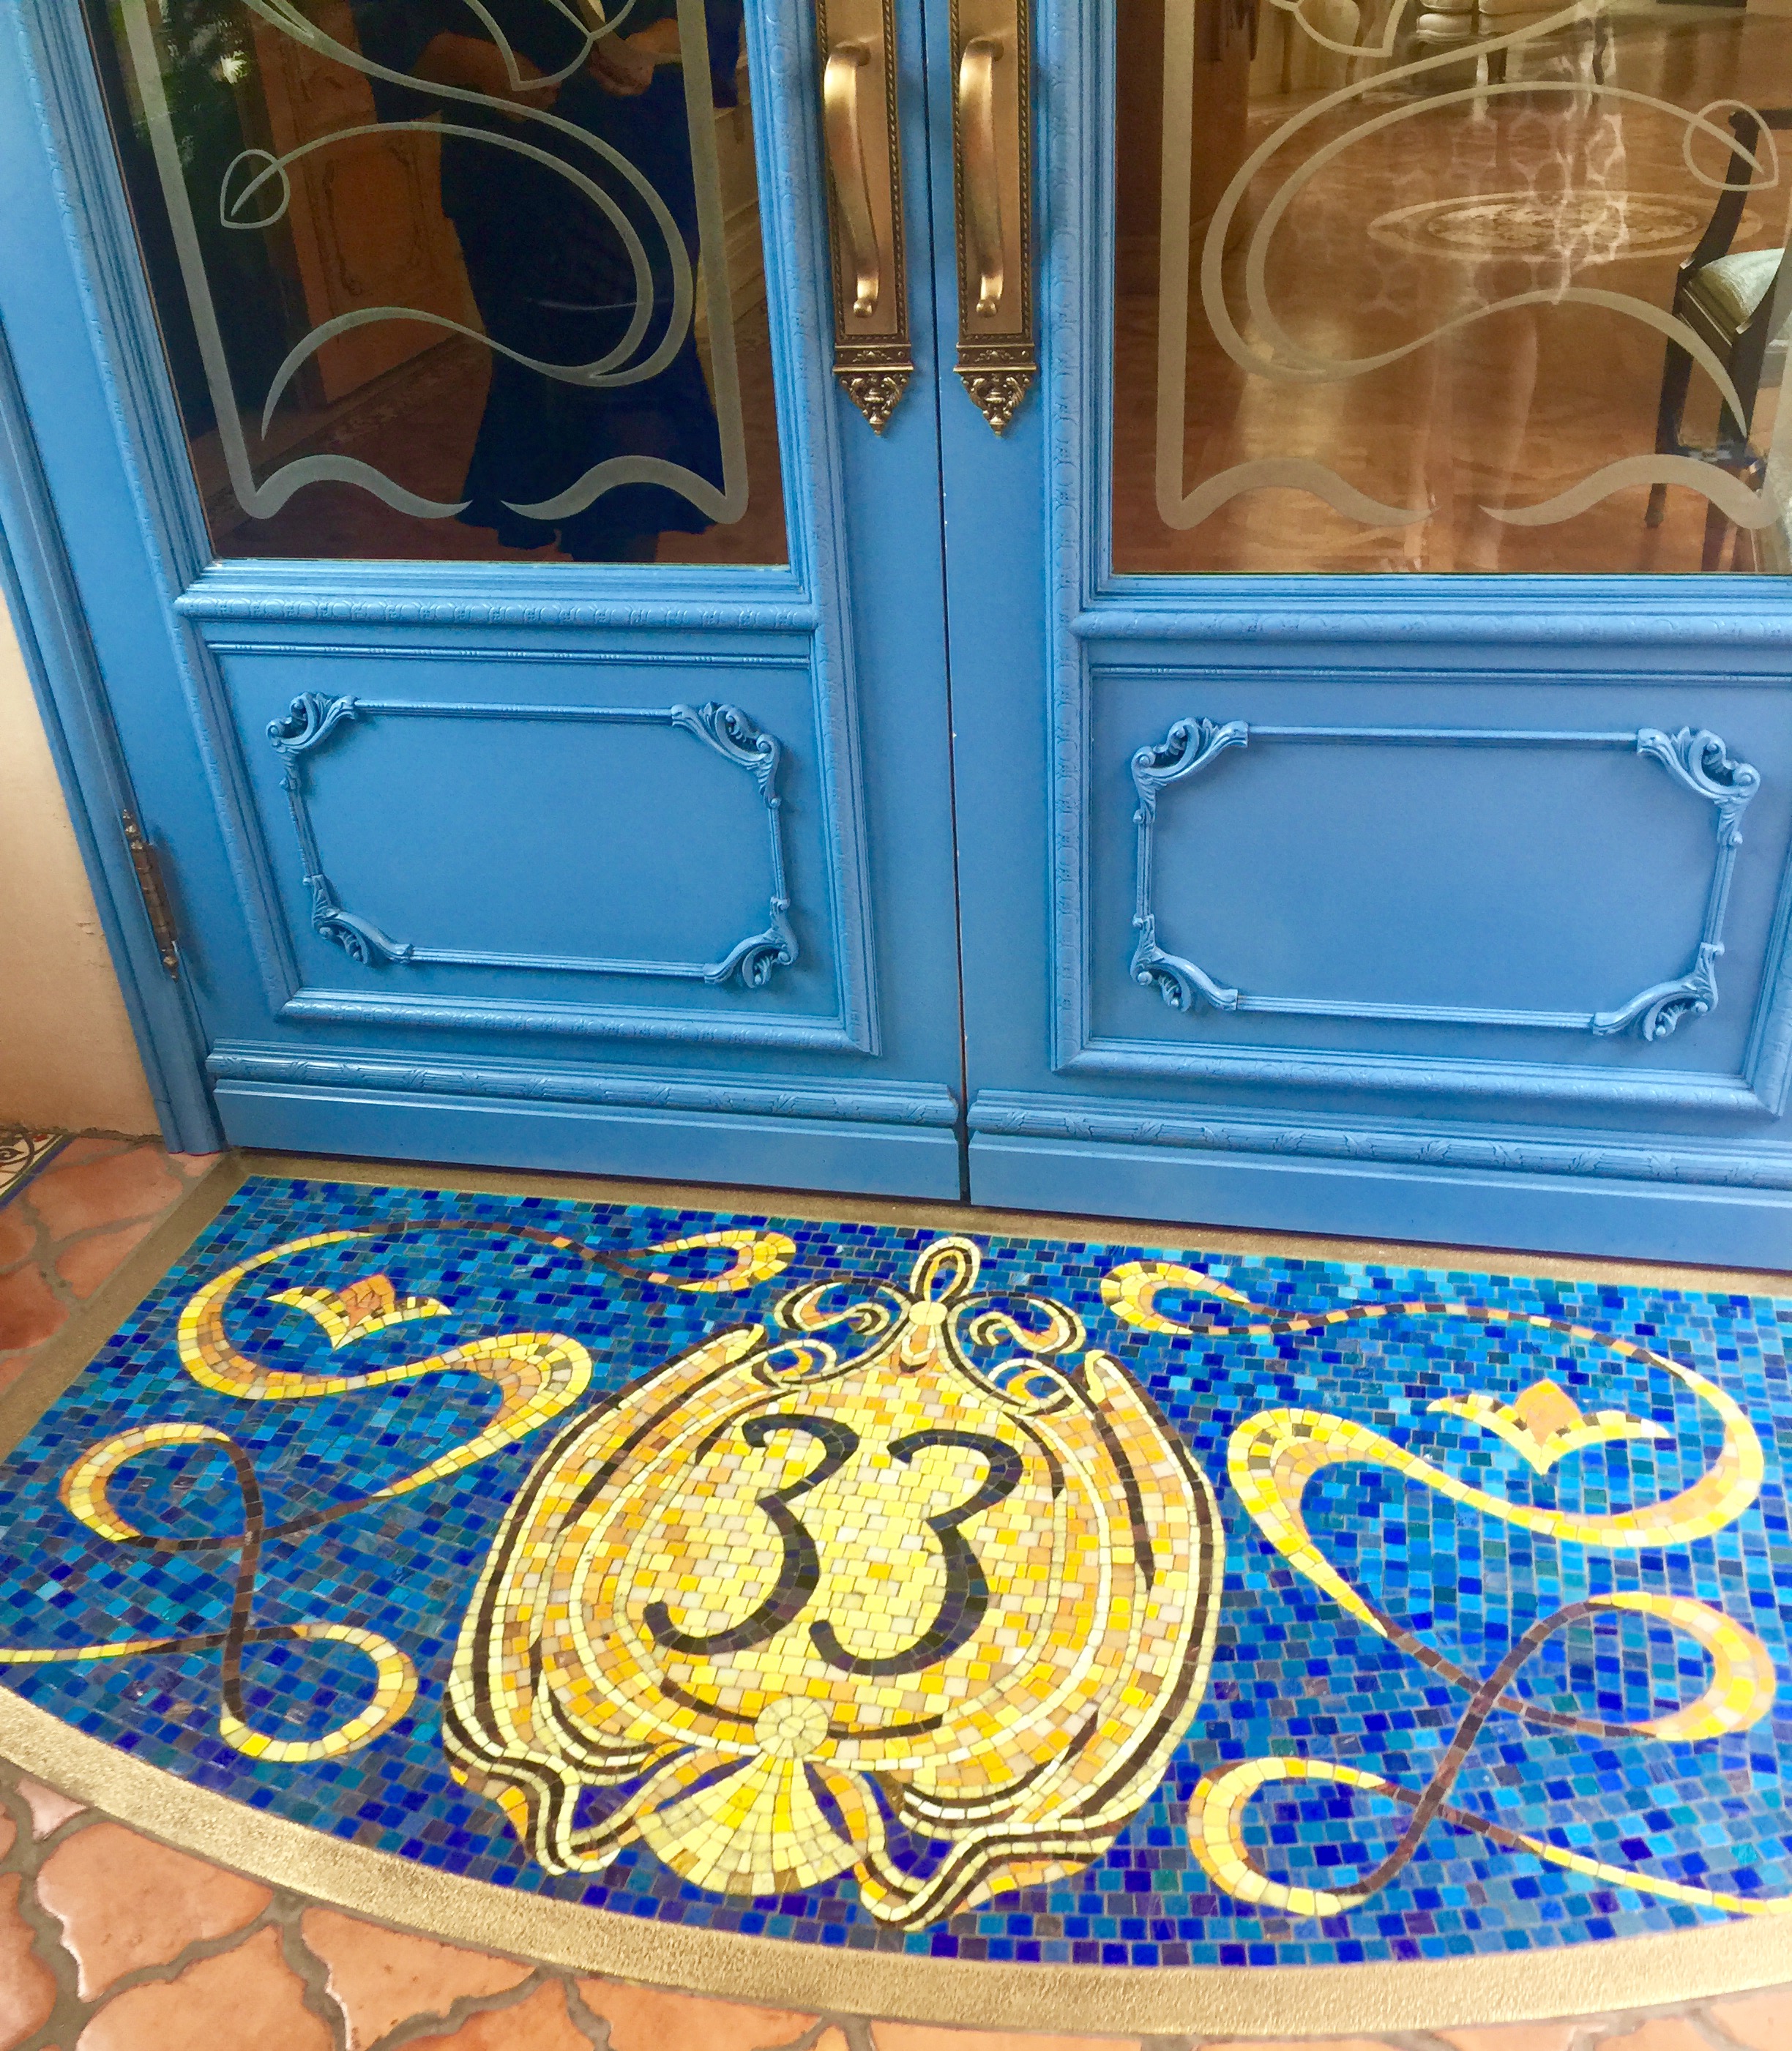 Club 33: The most exclusive and private one in the world